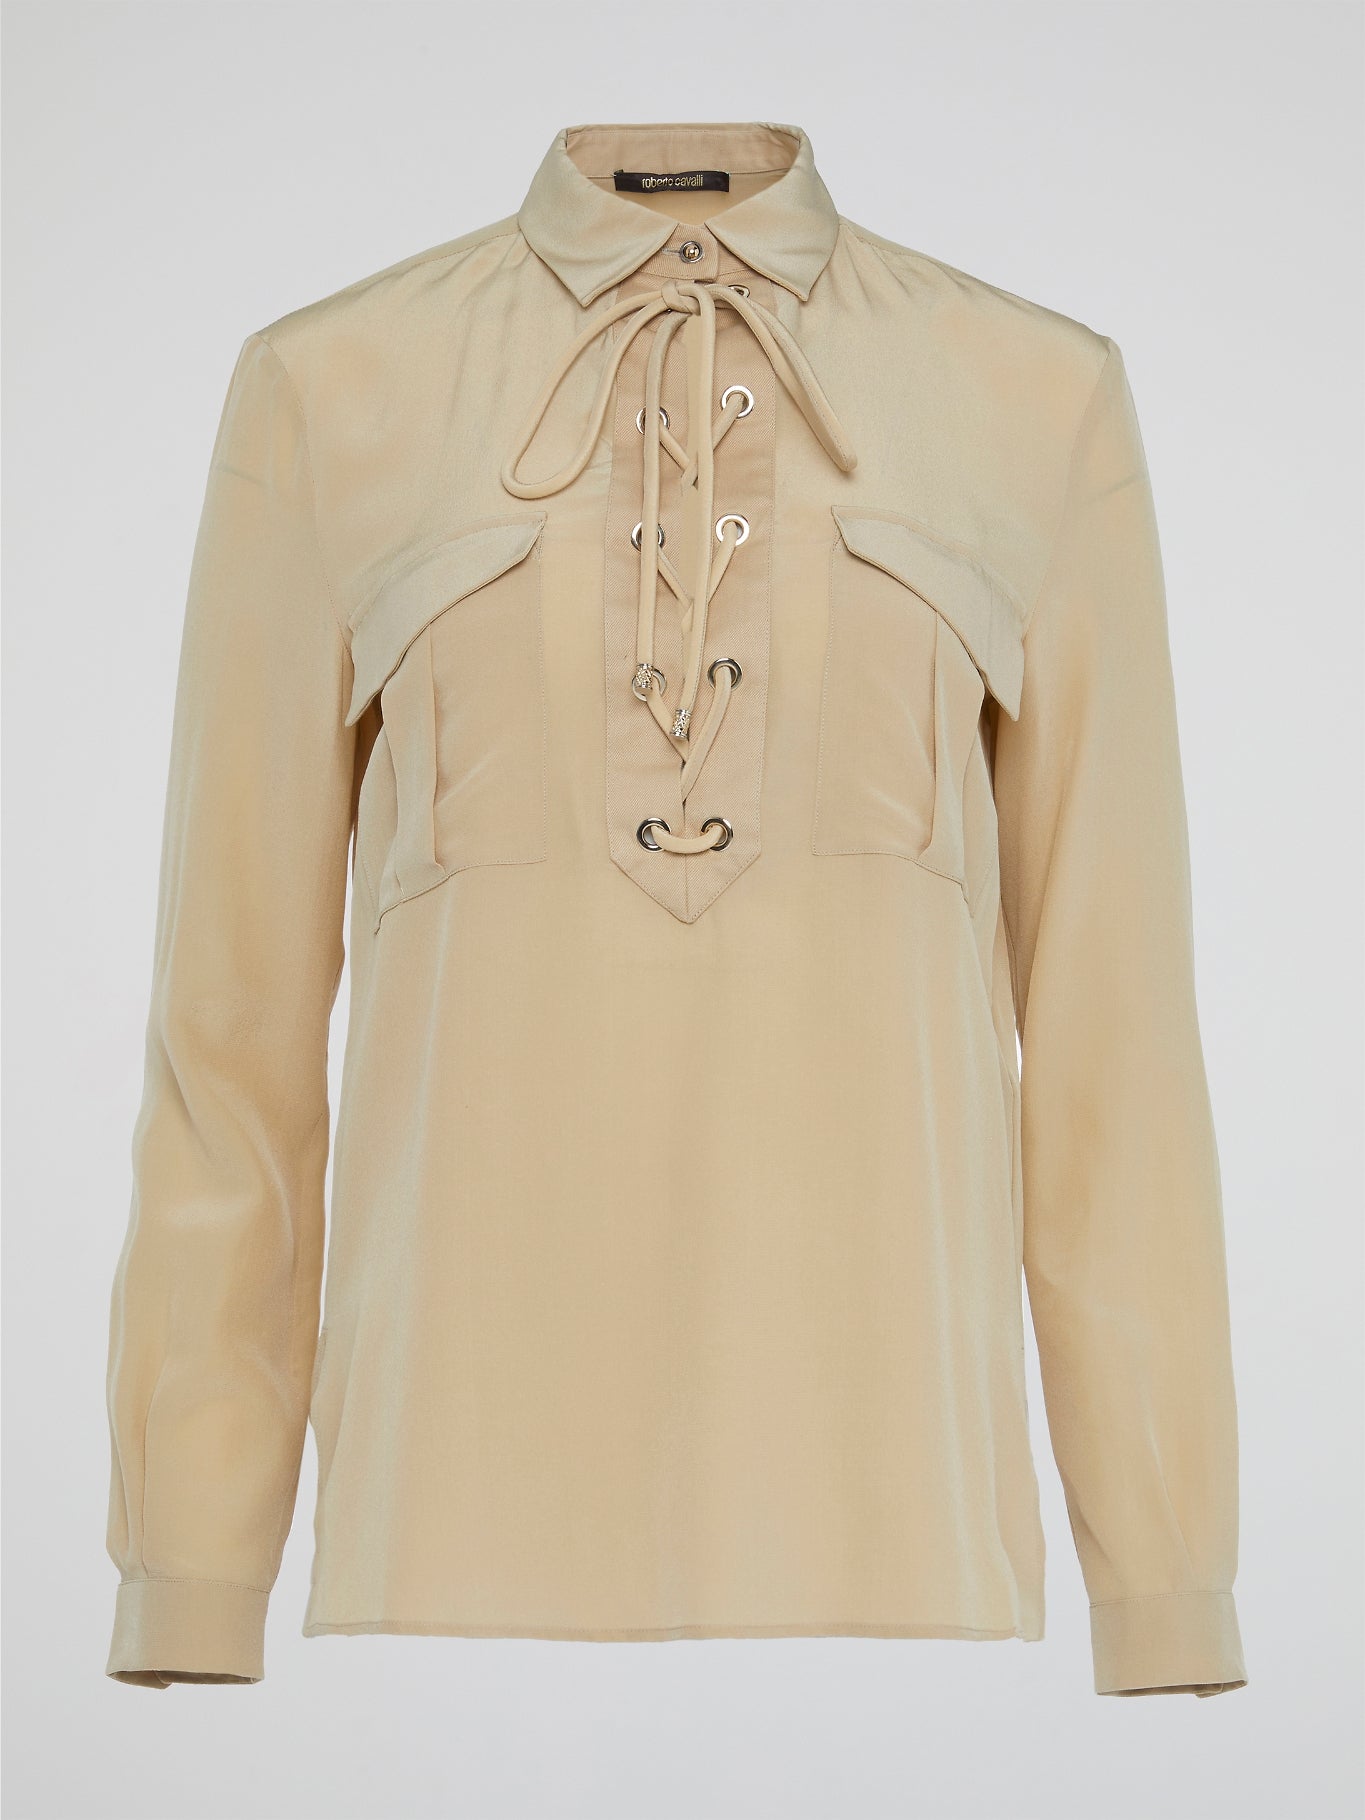 Elevate your wardrobe with the ultimate in luxury and sophistication - the Beige Lace Up Blouse by Roberto Cavalli. Crafted with exquisite attention to detail, this blouse features intricate lace detailing and a flattering silhouette that is sure to turn heads. Embrace your inner fashionista and effortlessly elevate any outfit with this chic and timeless piece.